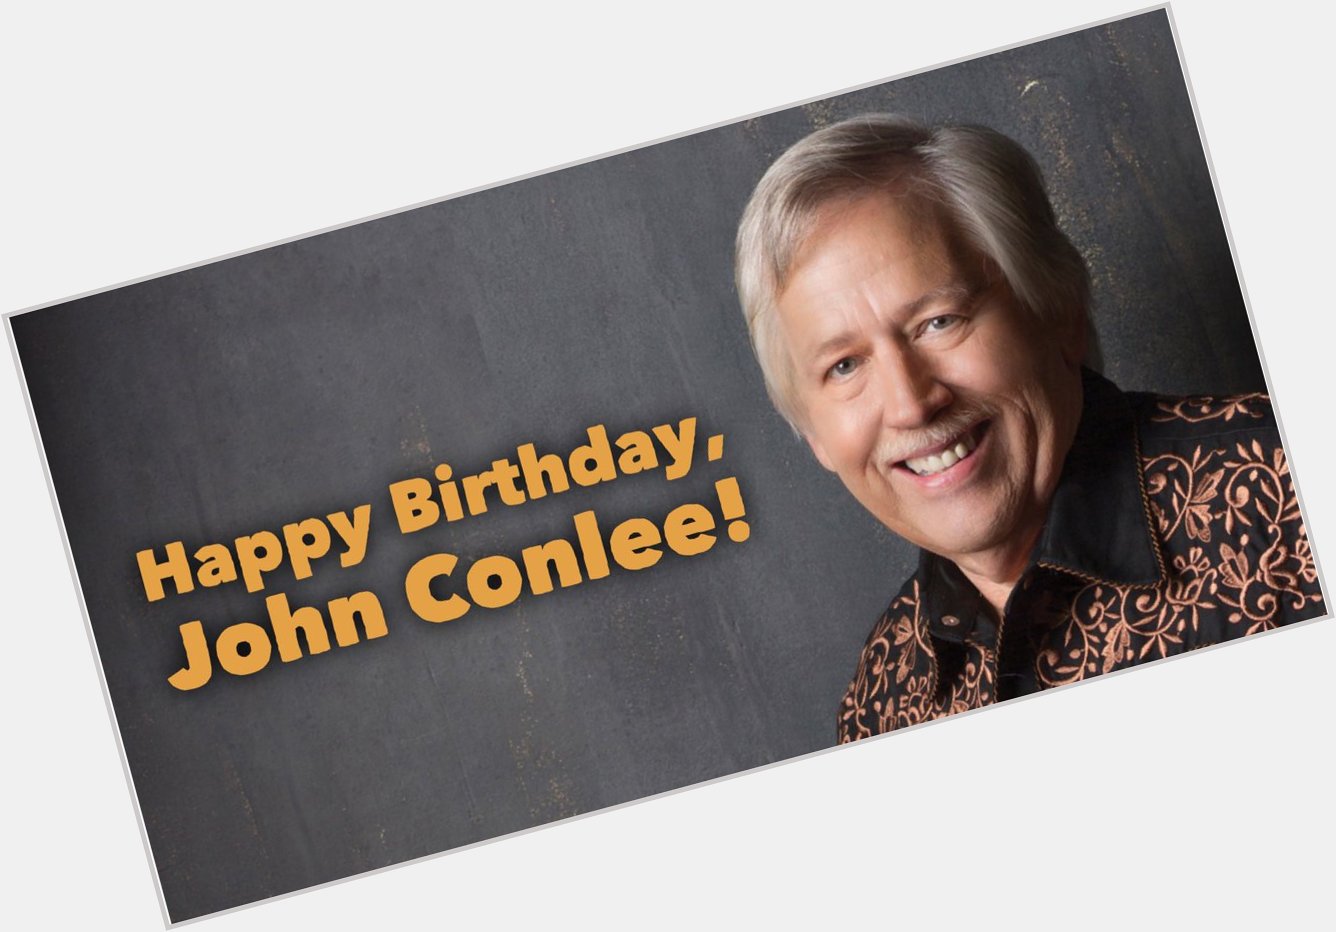 Happy Birthday to John Conlee! What s your favorite of his country hits?  